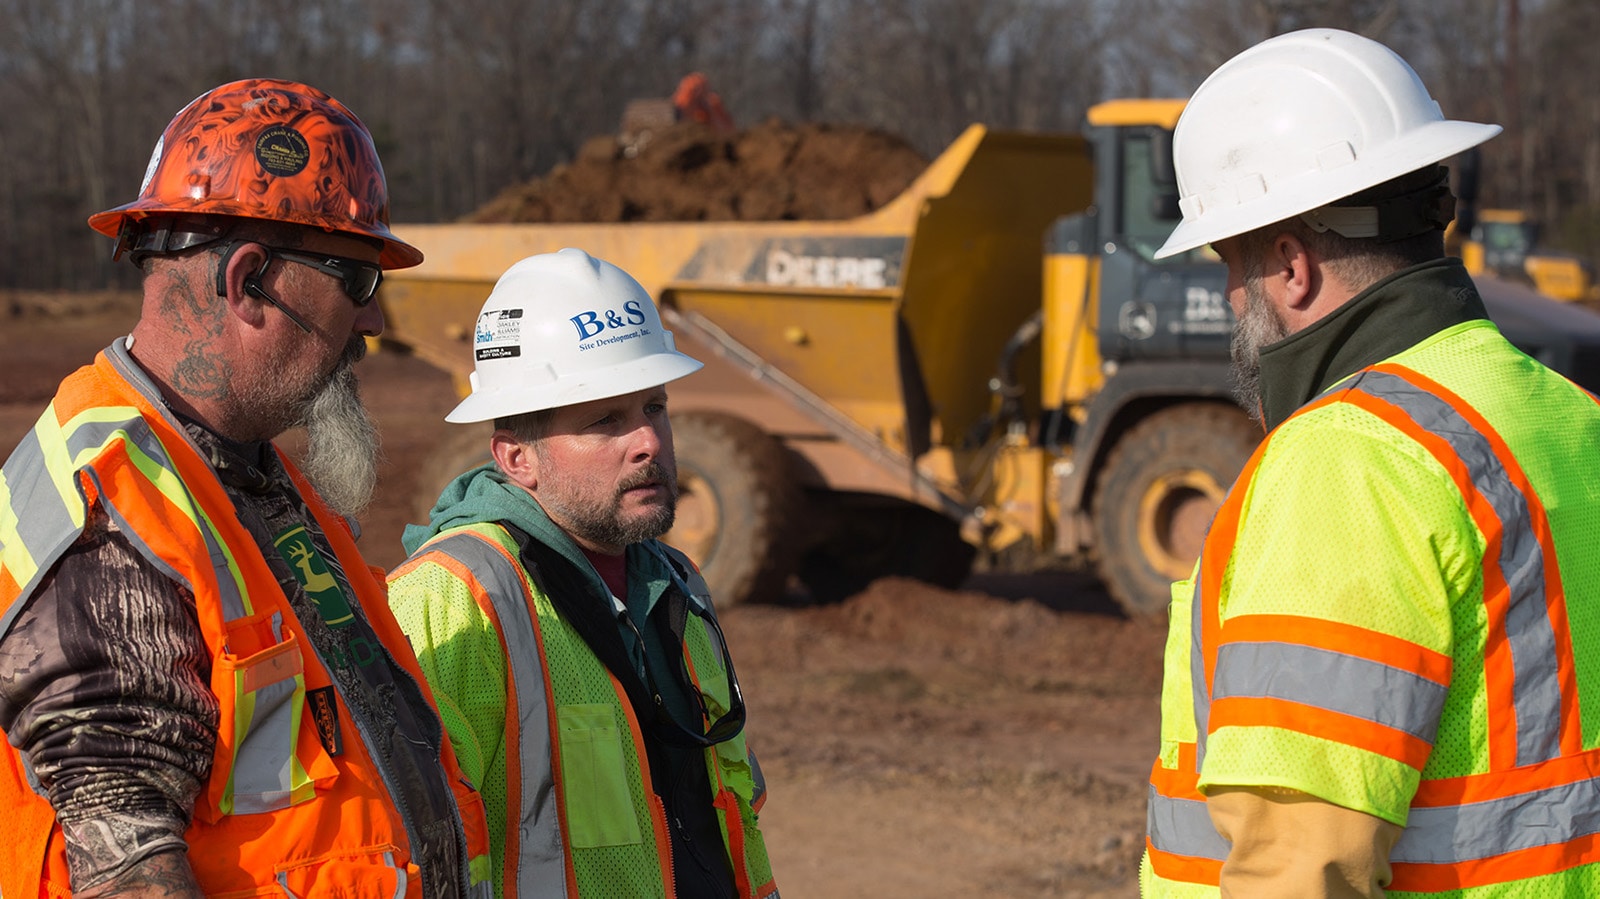 Three people on a jobsite talking with a dump truck full of dirt in the background